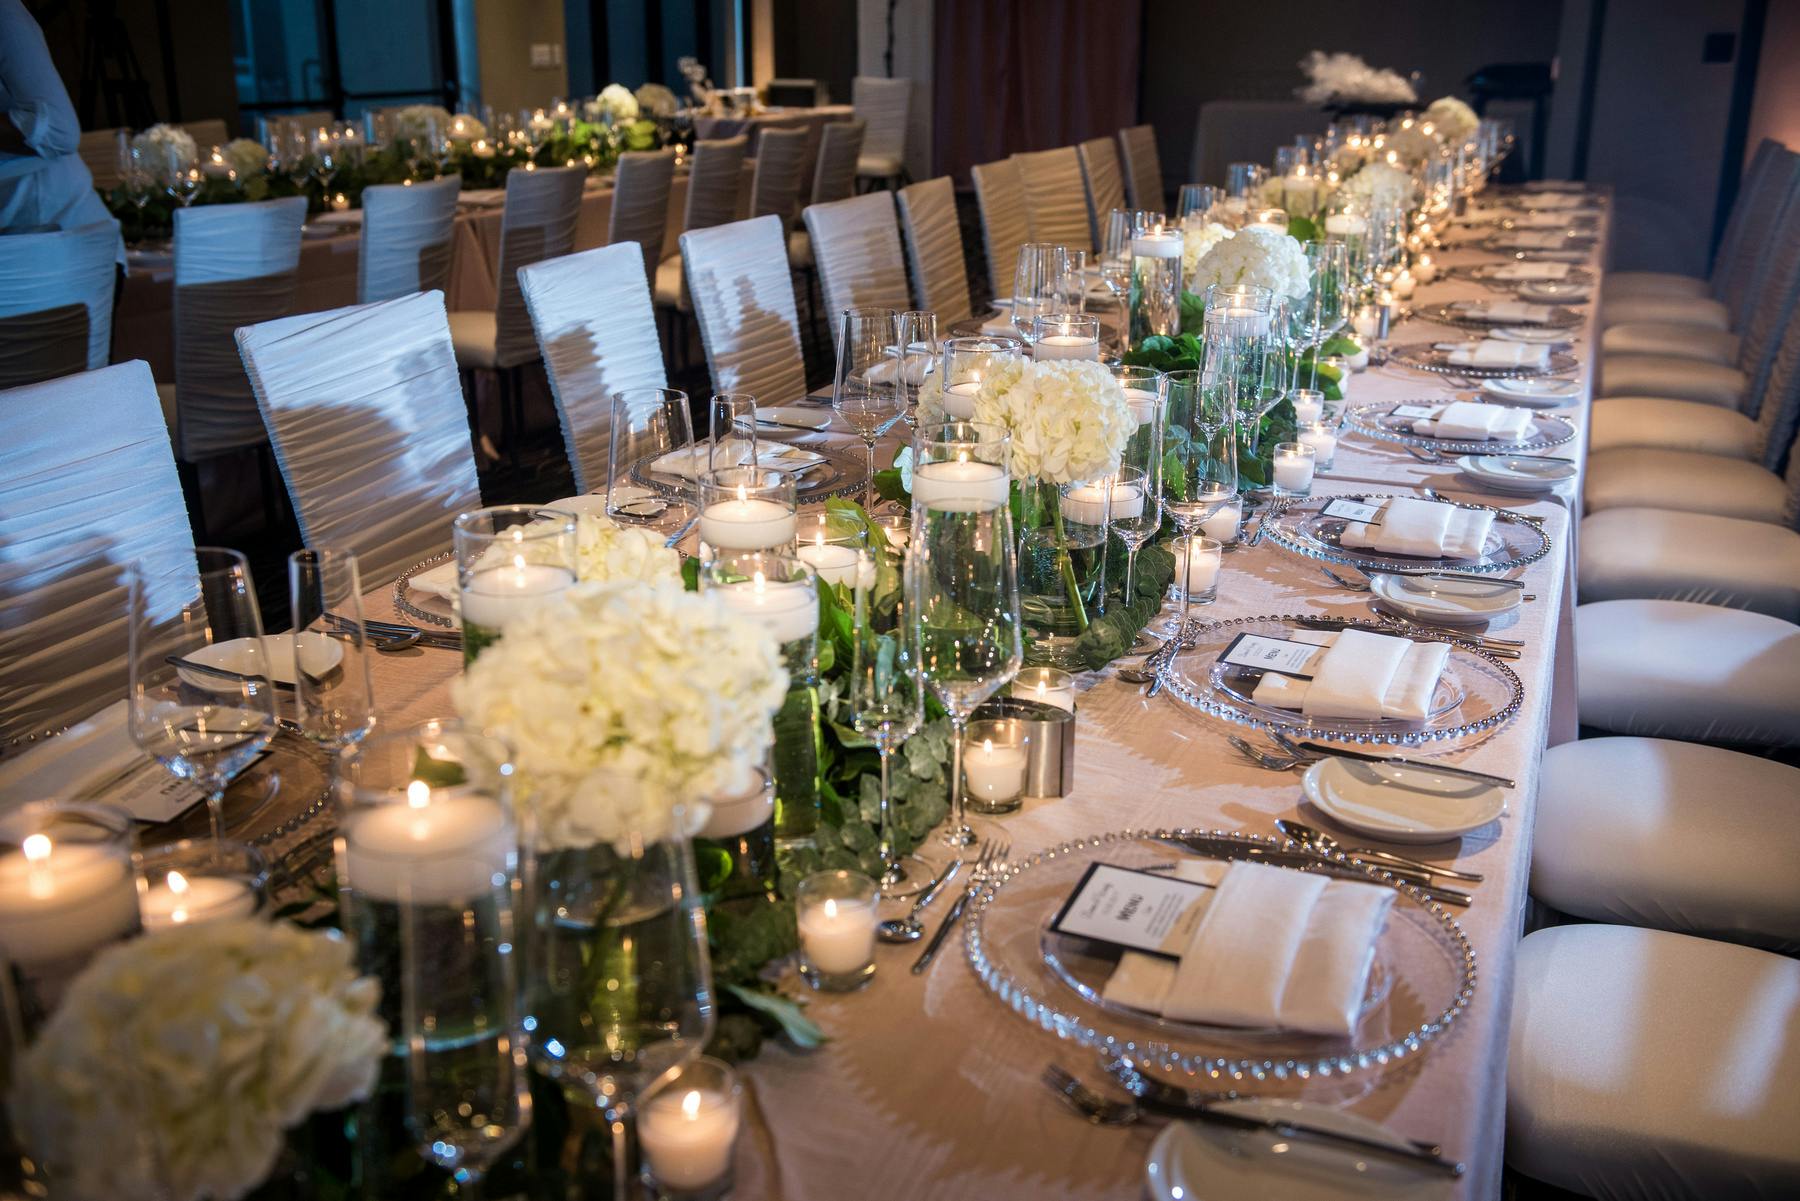 White Floral Wedding at Sanctuary Camelback Mountain Resort in Paradise Valley, AZ With Hydrangea Wedding Centerpieces